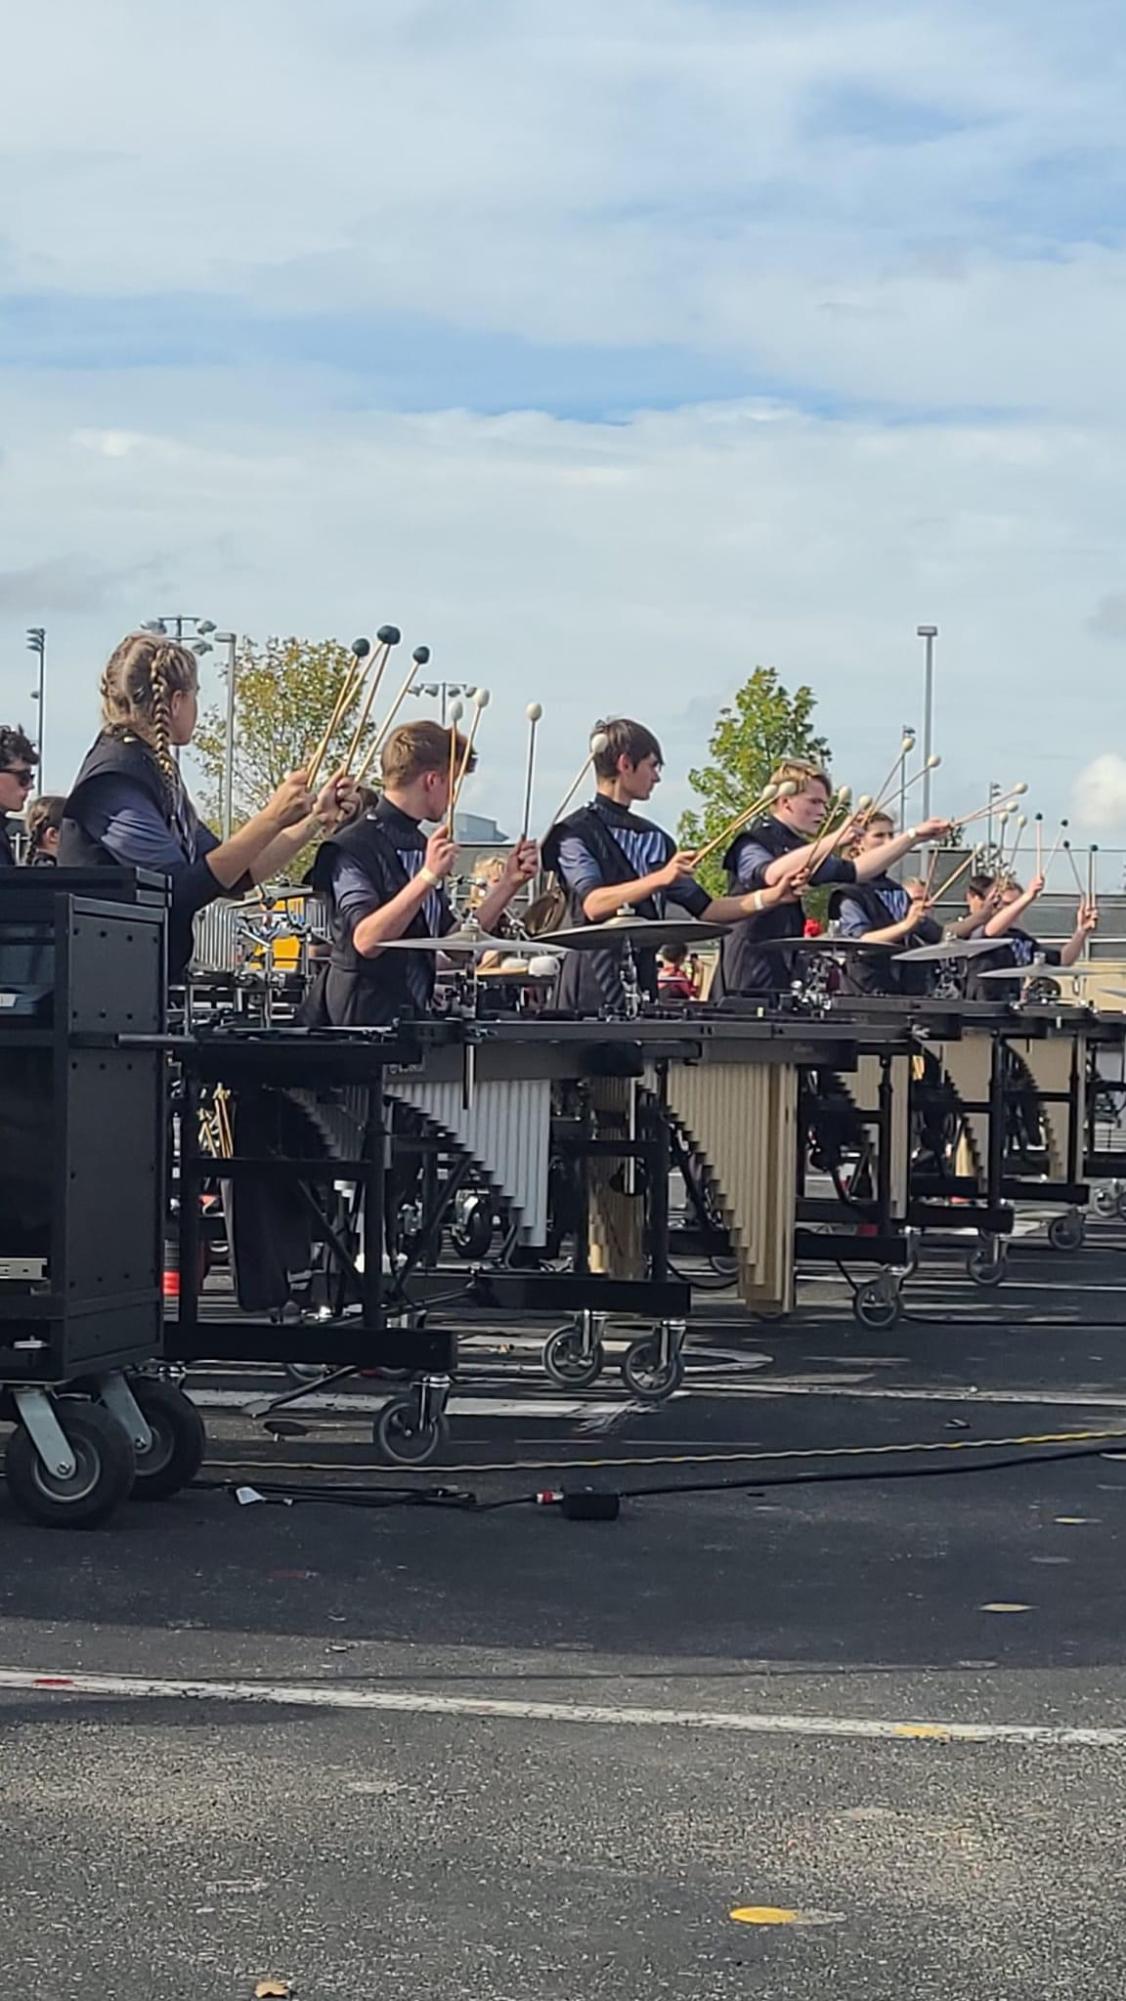 Front Ensemble warming up before the show